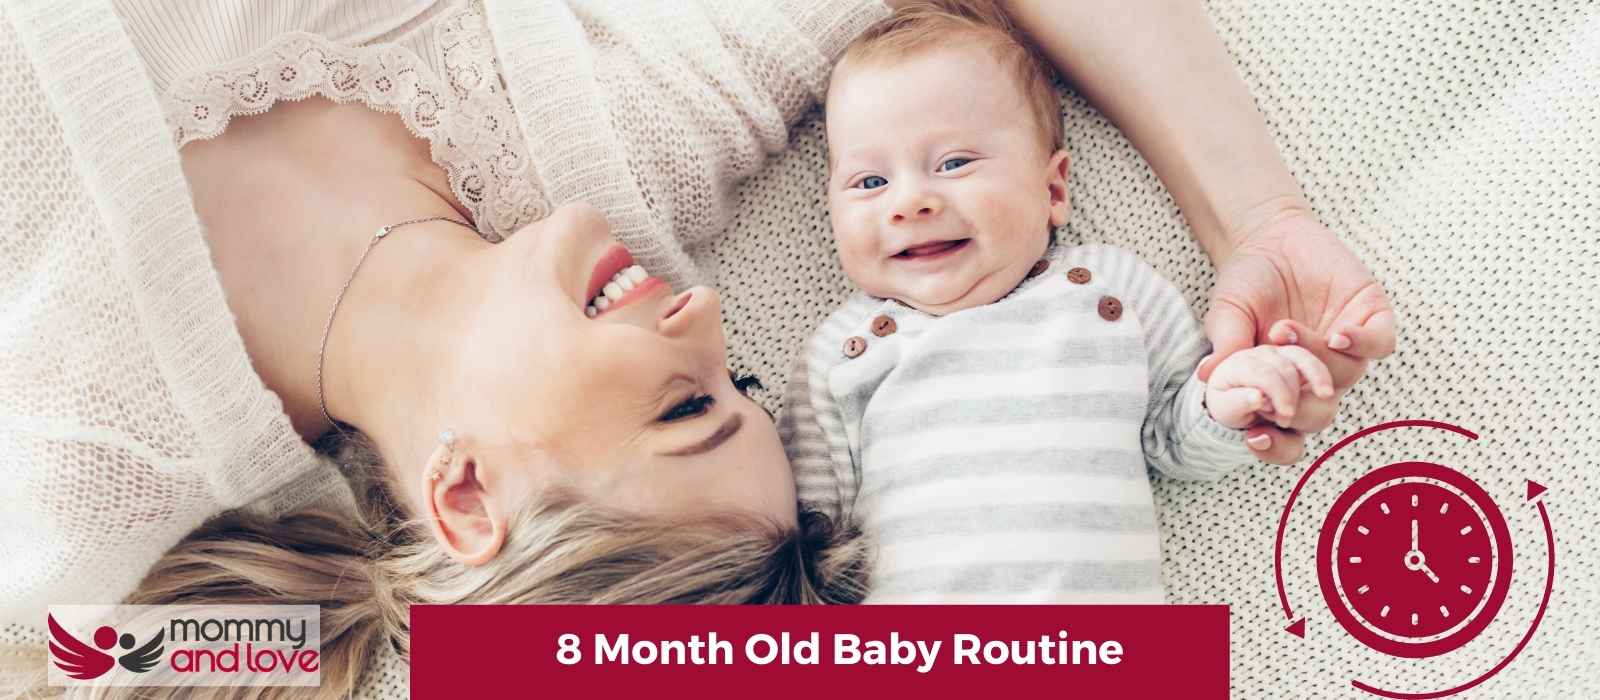 8 Month Old Baby Routine: Everything You Need to Know